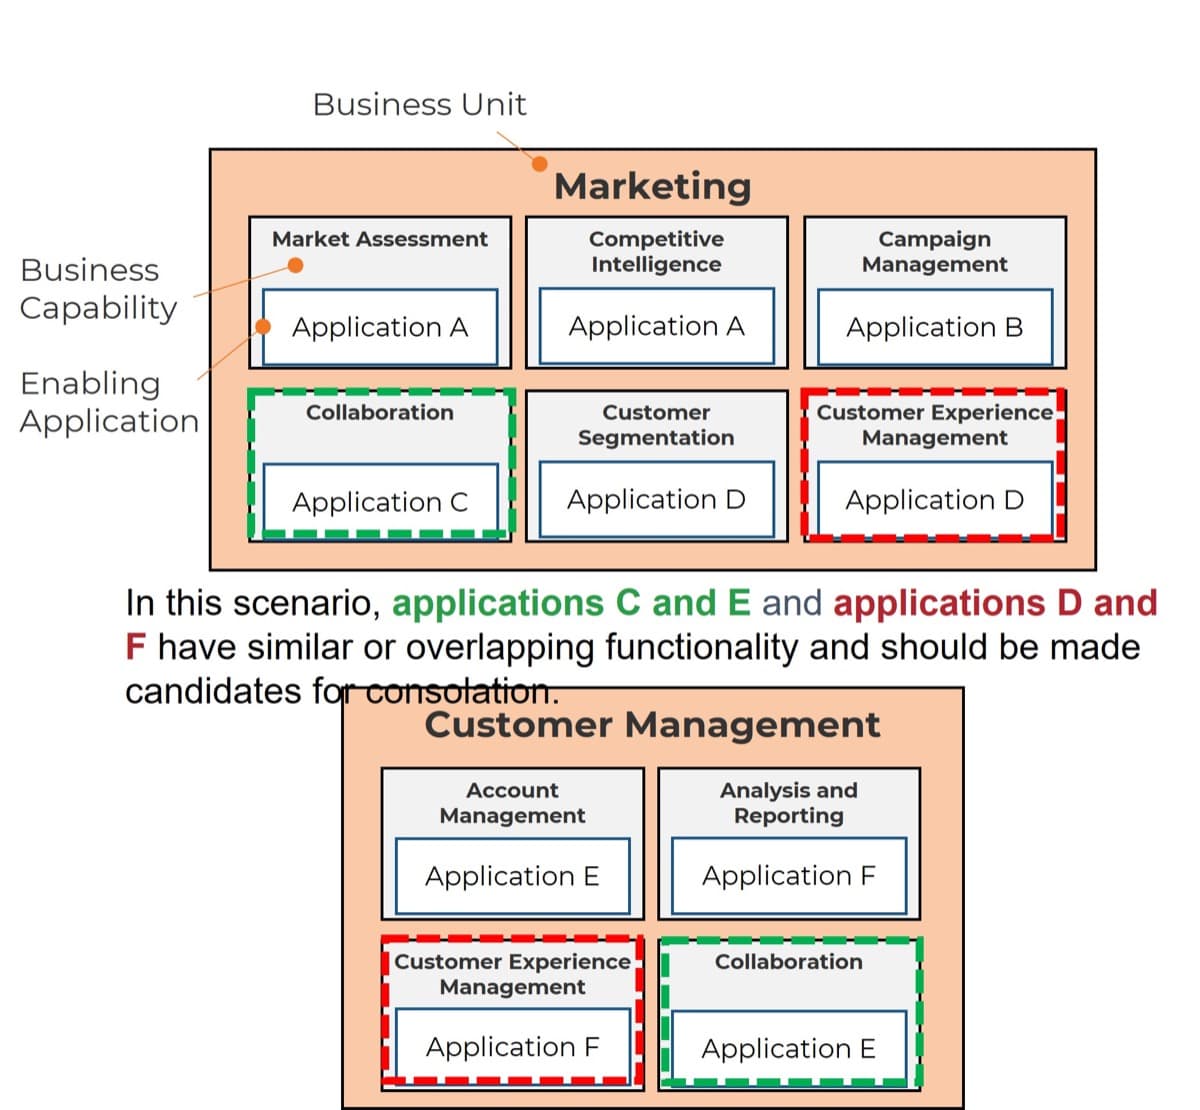 The image contains a screenshot of the business capability scenarios.